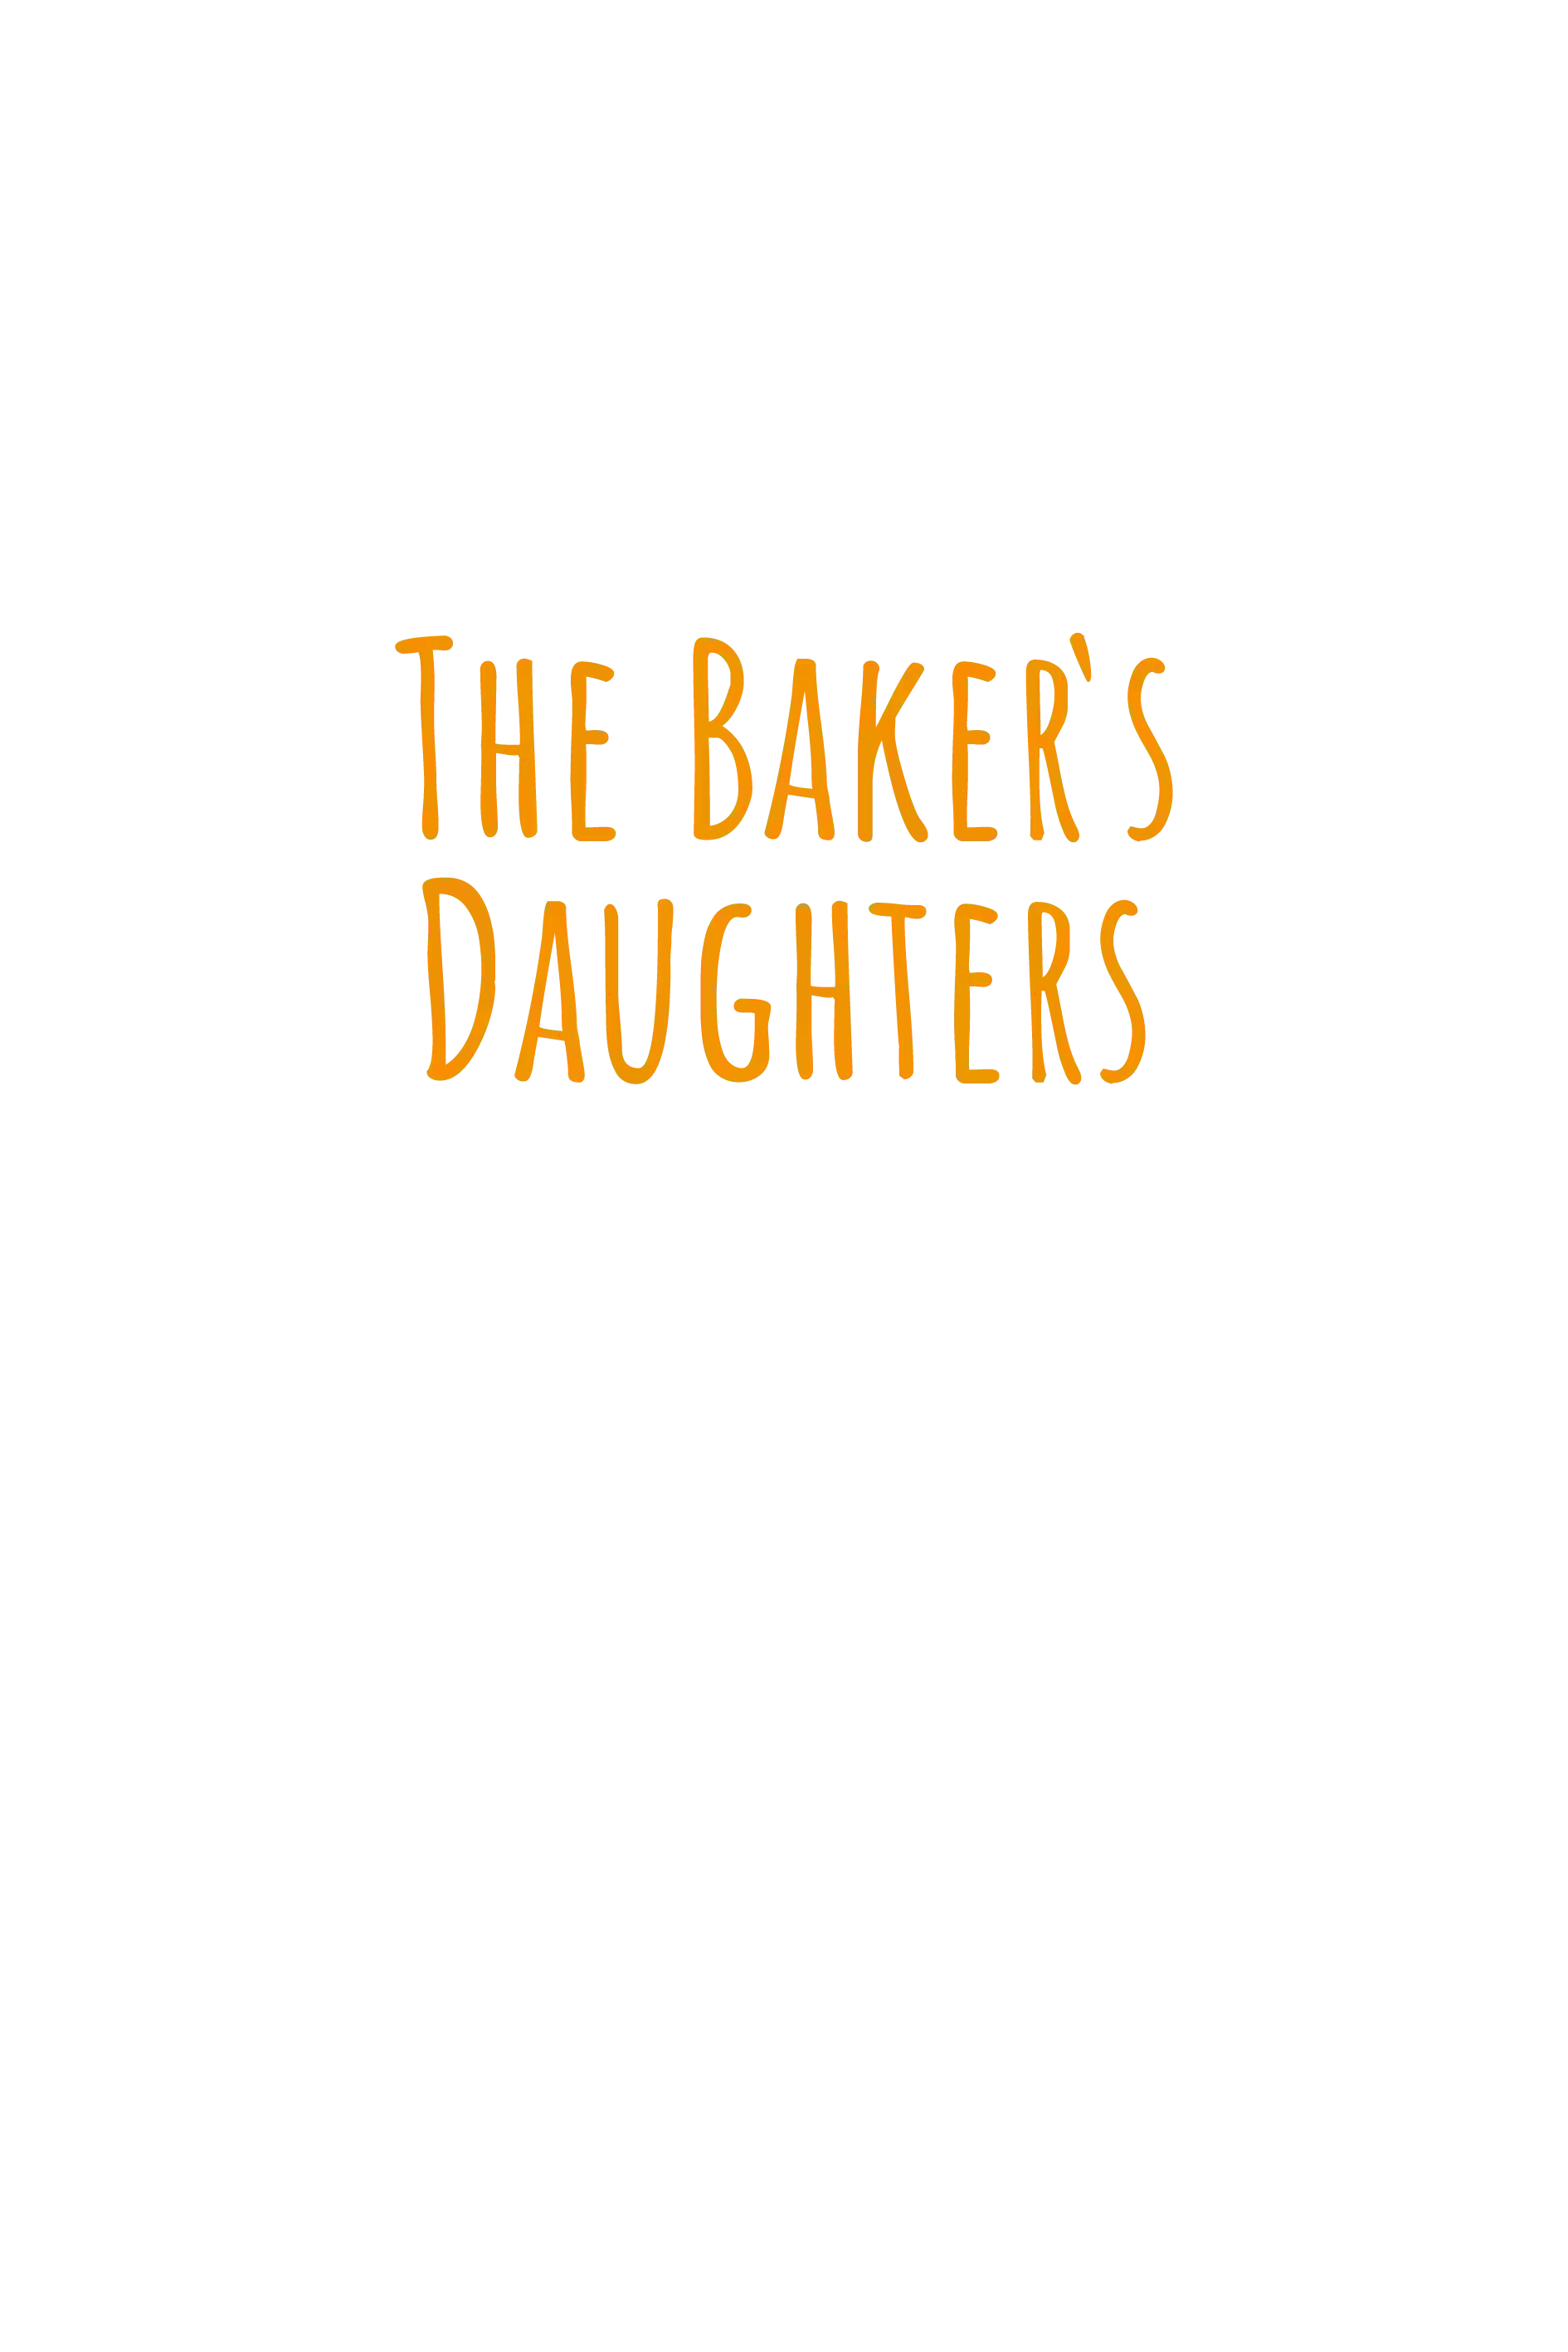 The Baker's Daughters